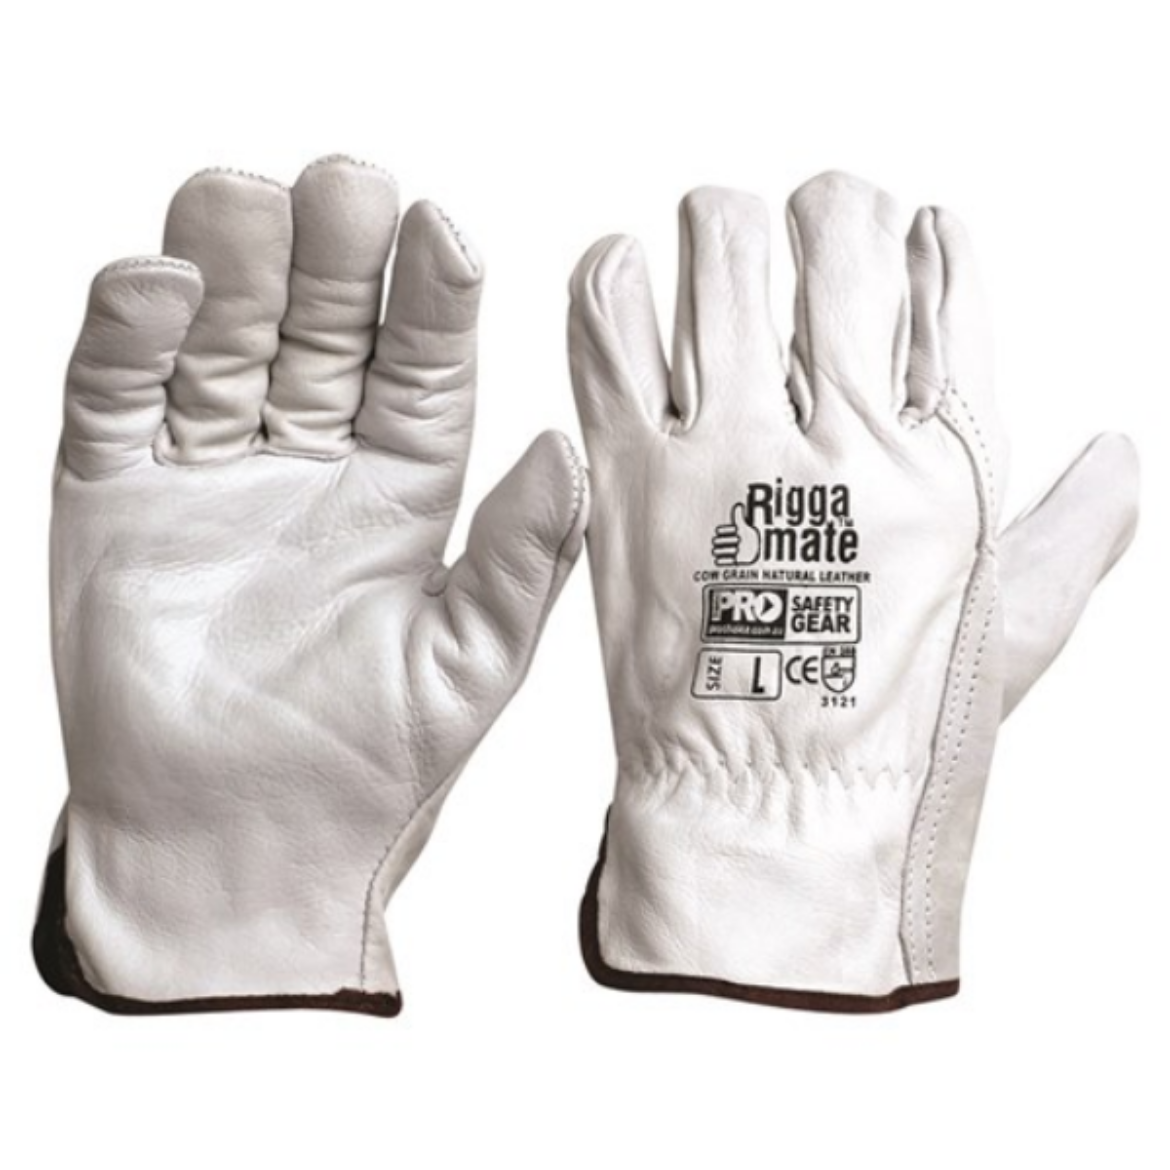 Picture of RIGGAMATE COW GRAIN NATURAL GLOVES, GREY. AVAILABLE IN SIZES S/M/L/XL/2XL/3XL